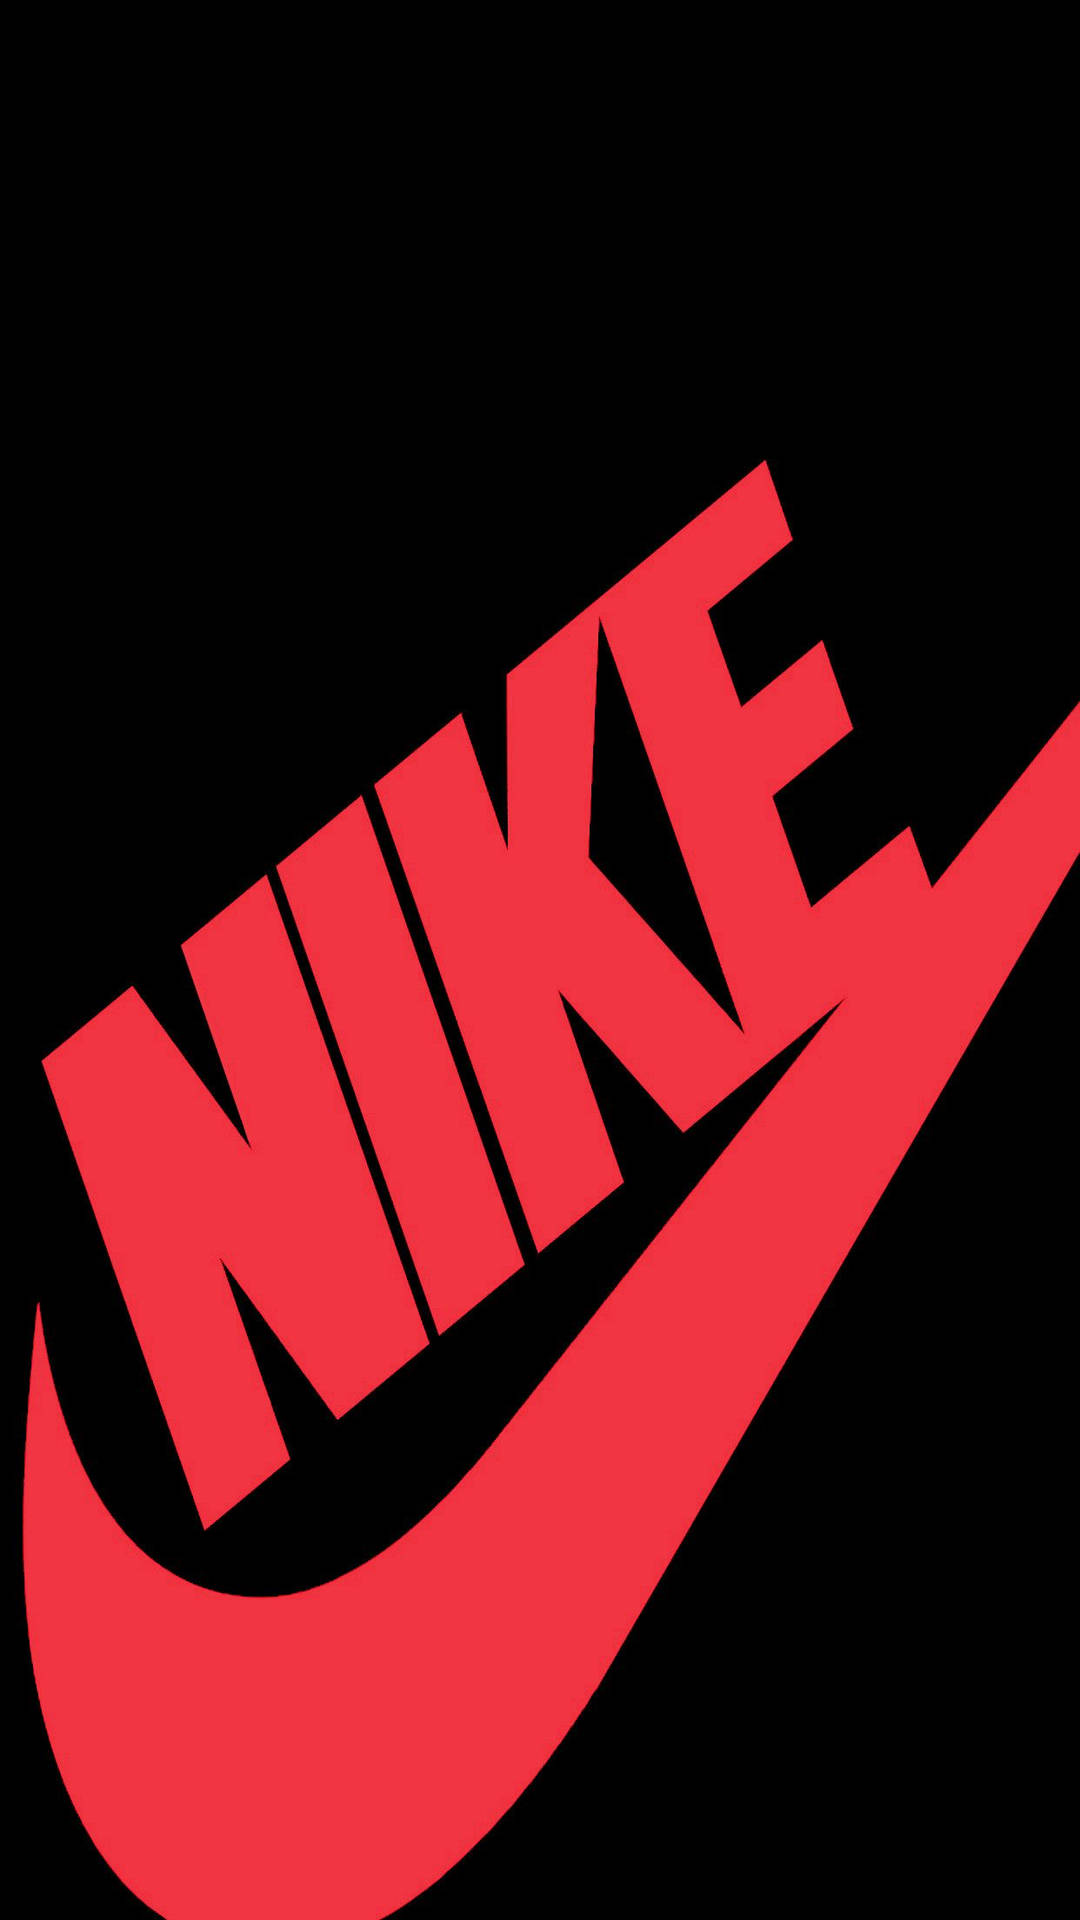 Nike 1242X2208 Wallpaper and Background Image